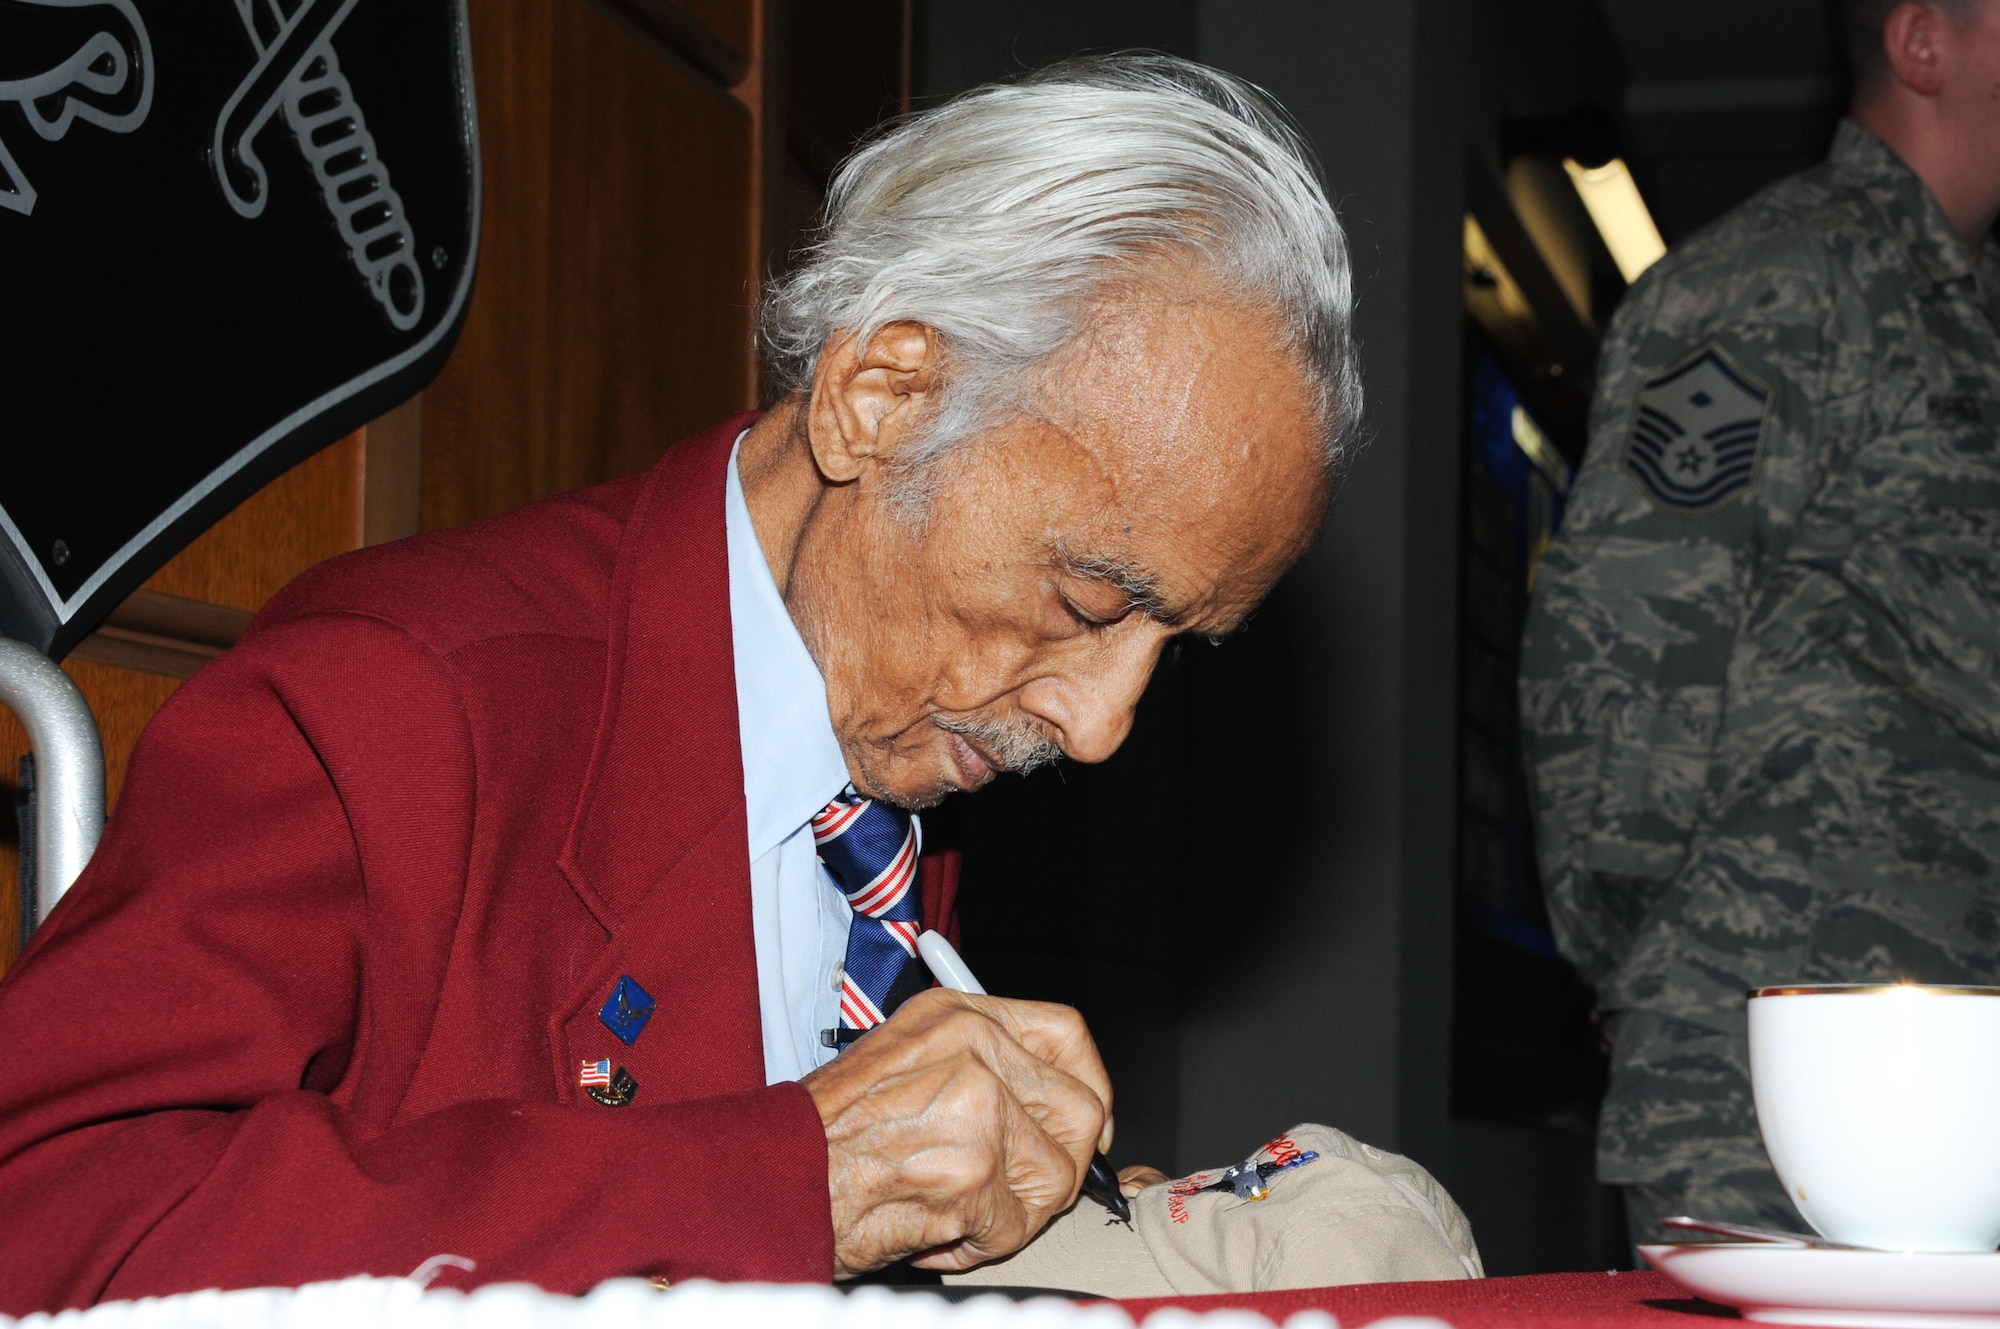 Retired Lt. Col. Herbert "Gene" Carter, one of the original Tuskegee Airmen, who flew in the famous Red Tail squadron during WWII, signs personal items and memorabilia after the ceremony. (Air Force photo by Bud Hancock)